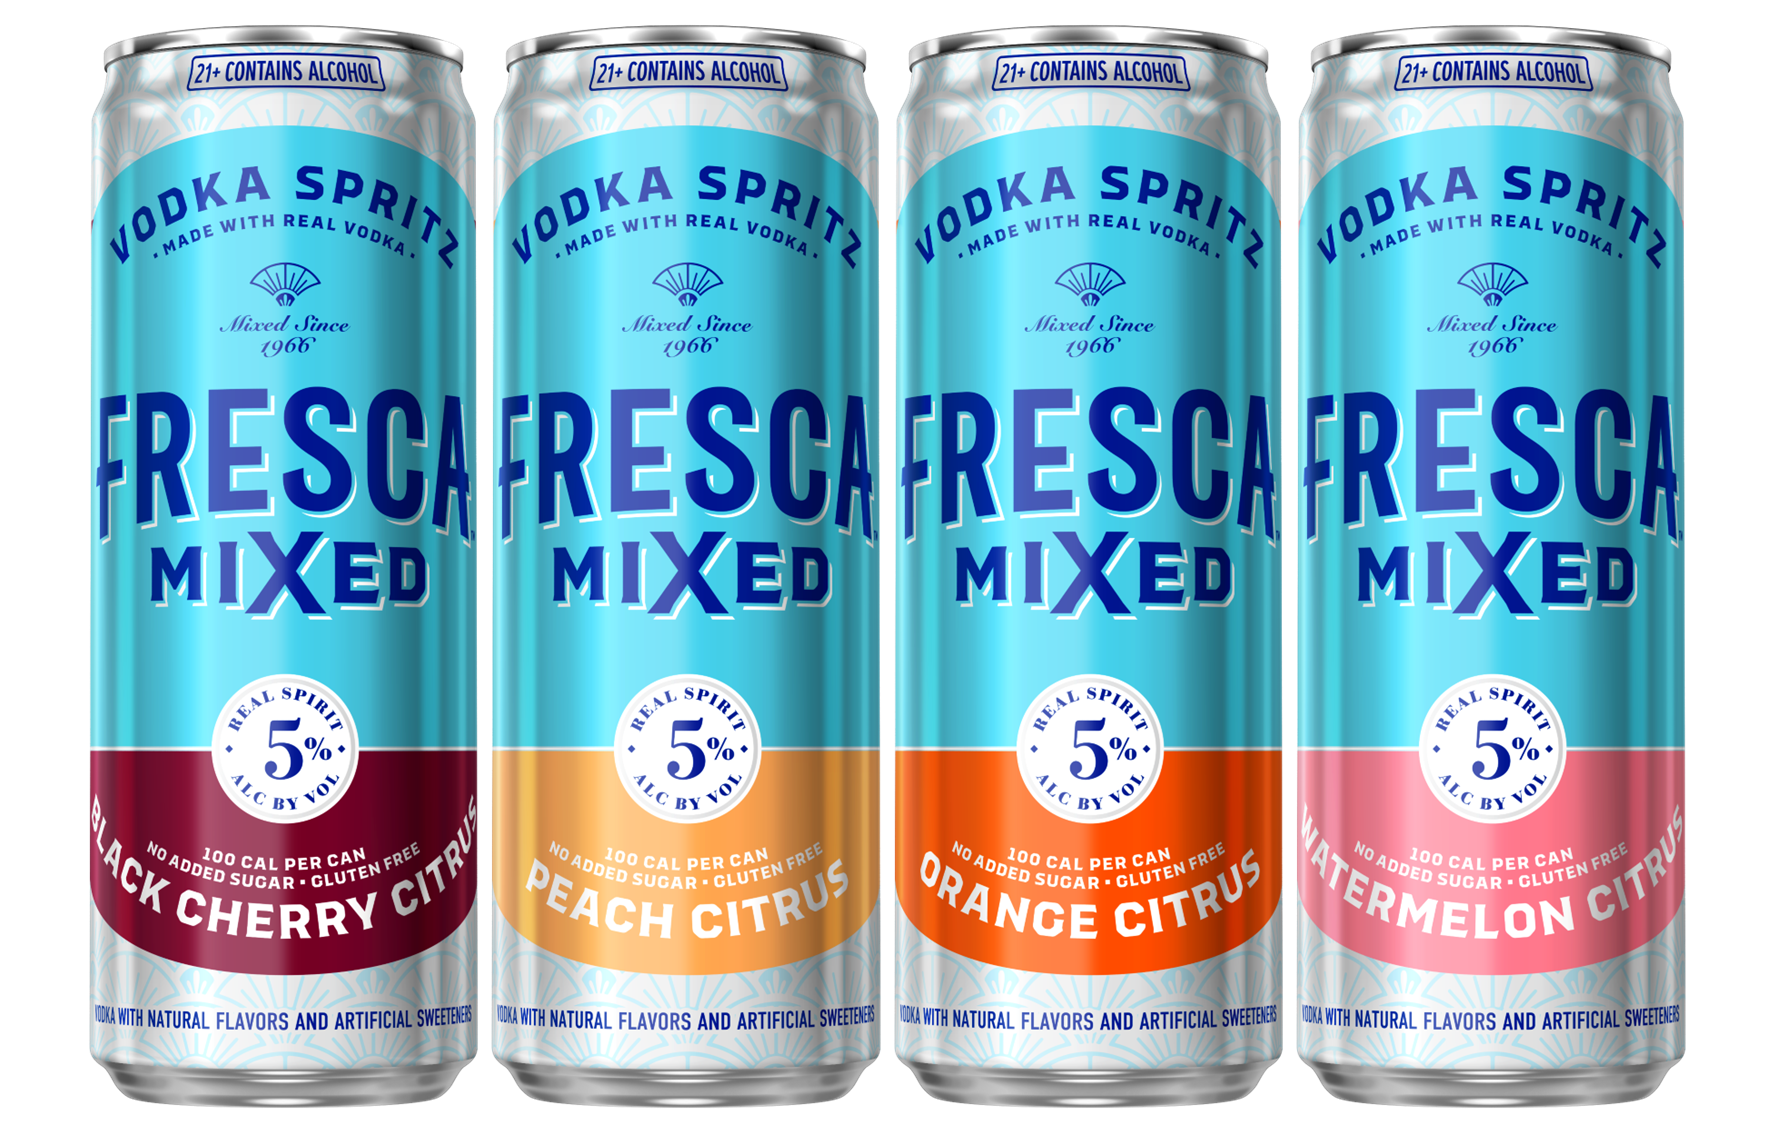 FRESCA Mixed Variety Pack Act II